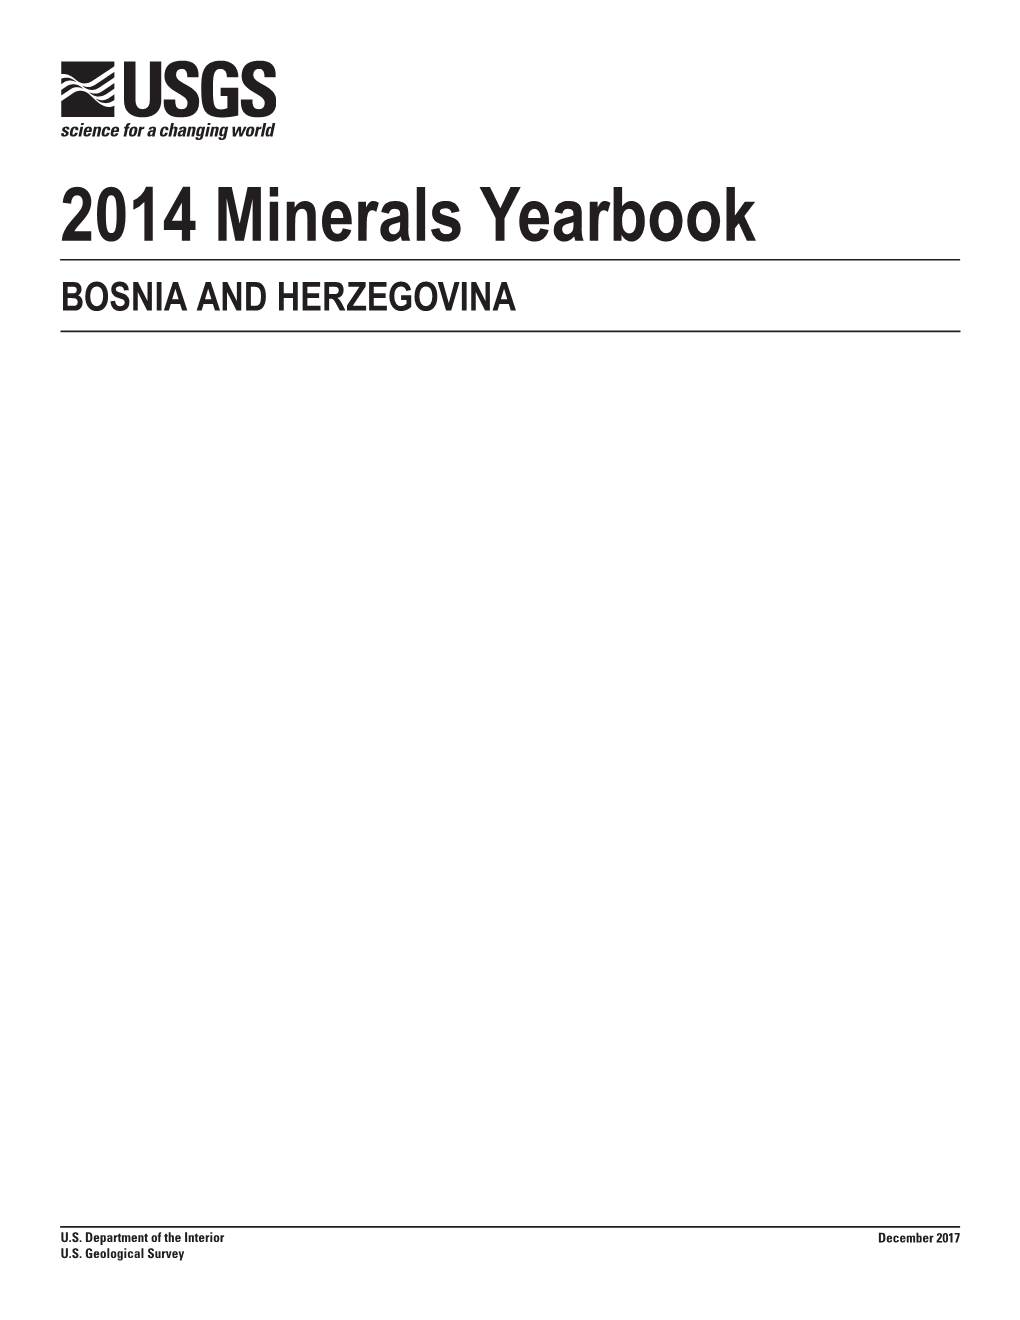 The Mineral Industry of Bosnia and Herzegovina in 2014